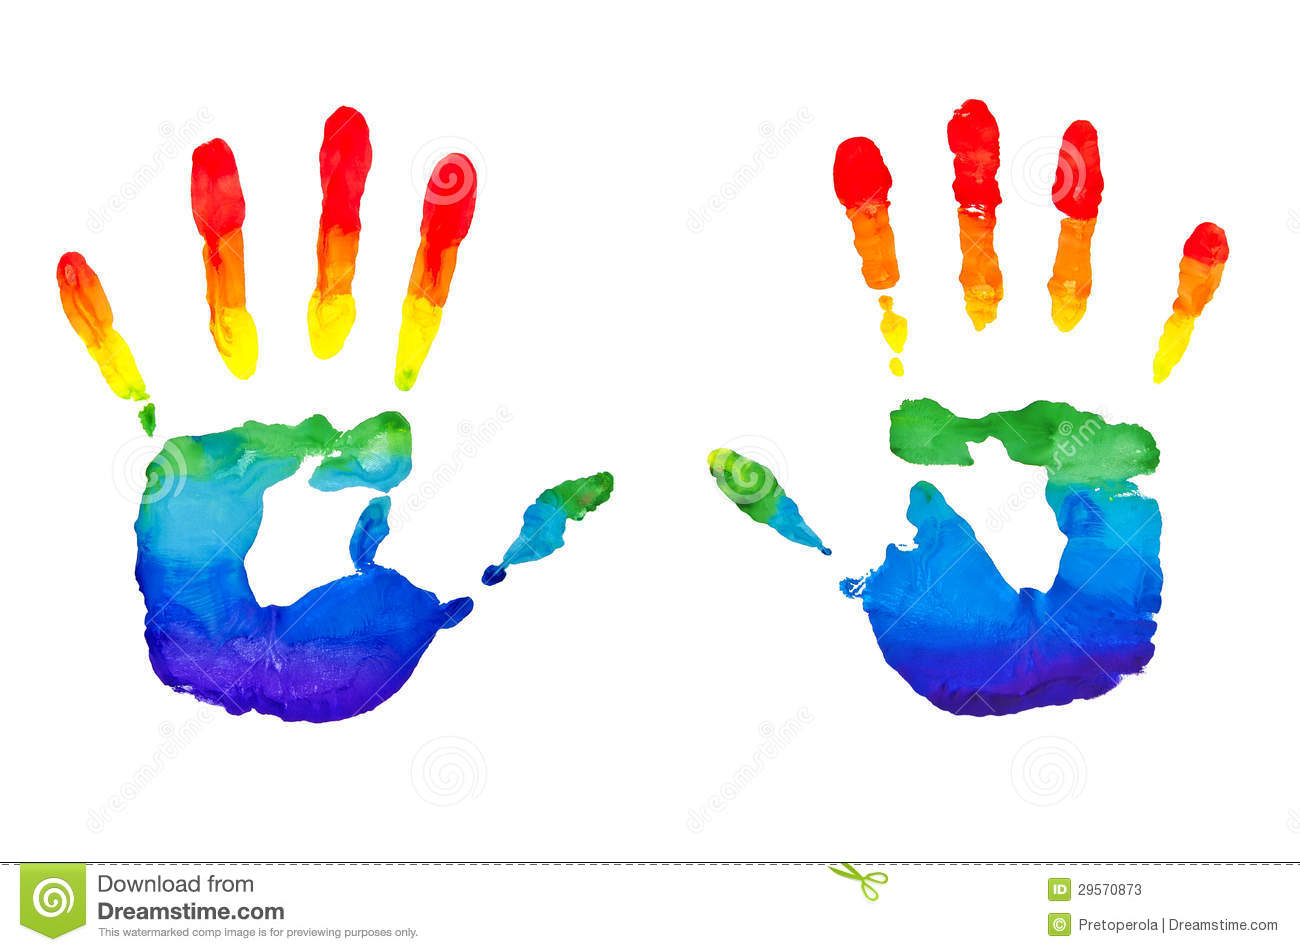 Rainbow Painted Hands Stock Photos   Image  29570873